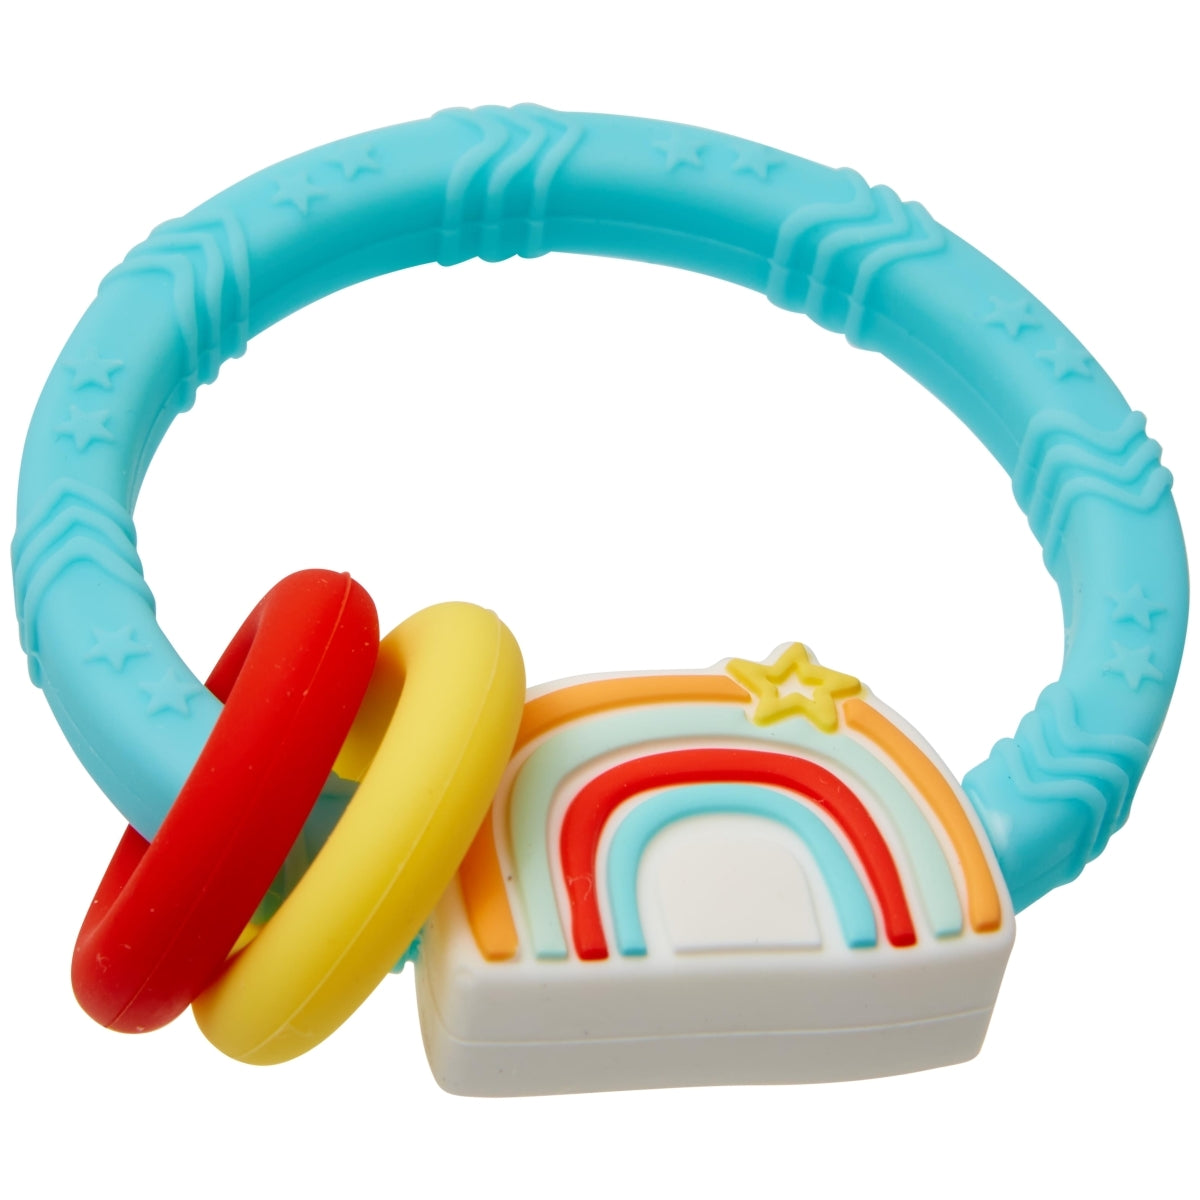 C.R. Gibson Silicone Teether